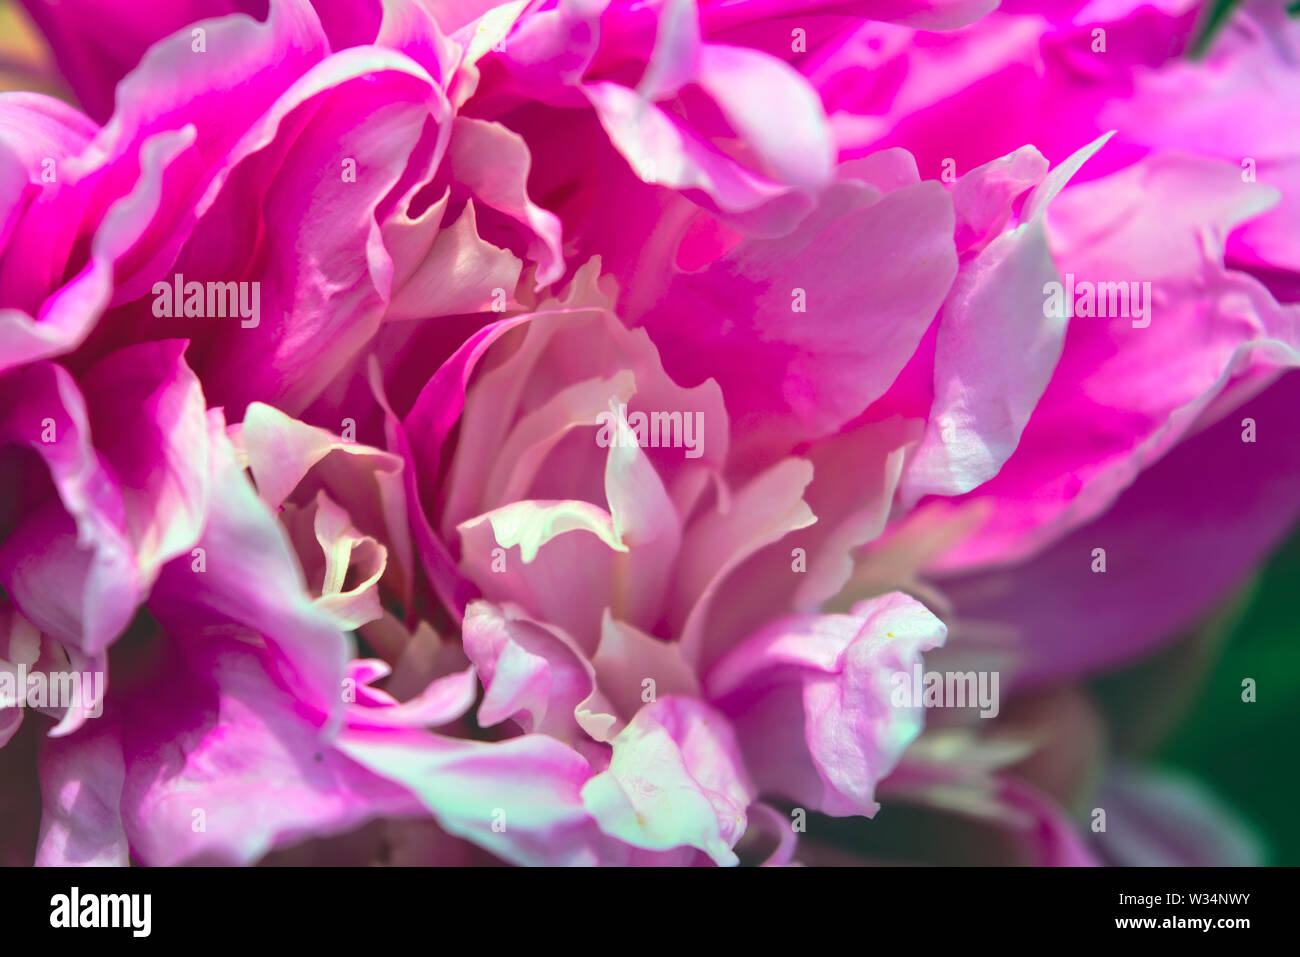 Pink peony flower. Paeonia lactiflora is a species of herbaceous perennial flowering plant in the family Paeoniaceae. Stock Photo